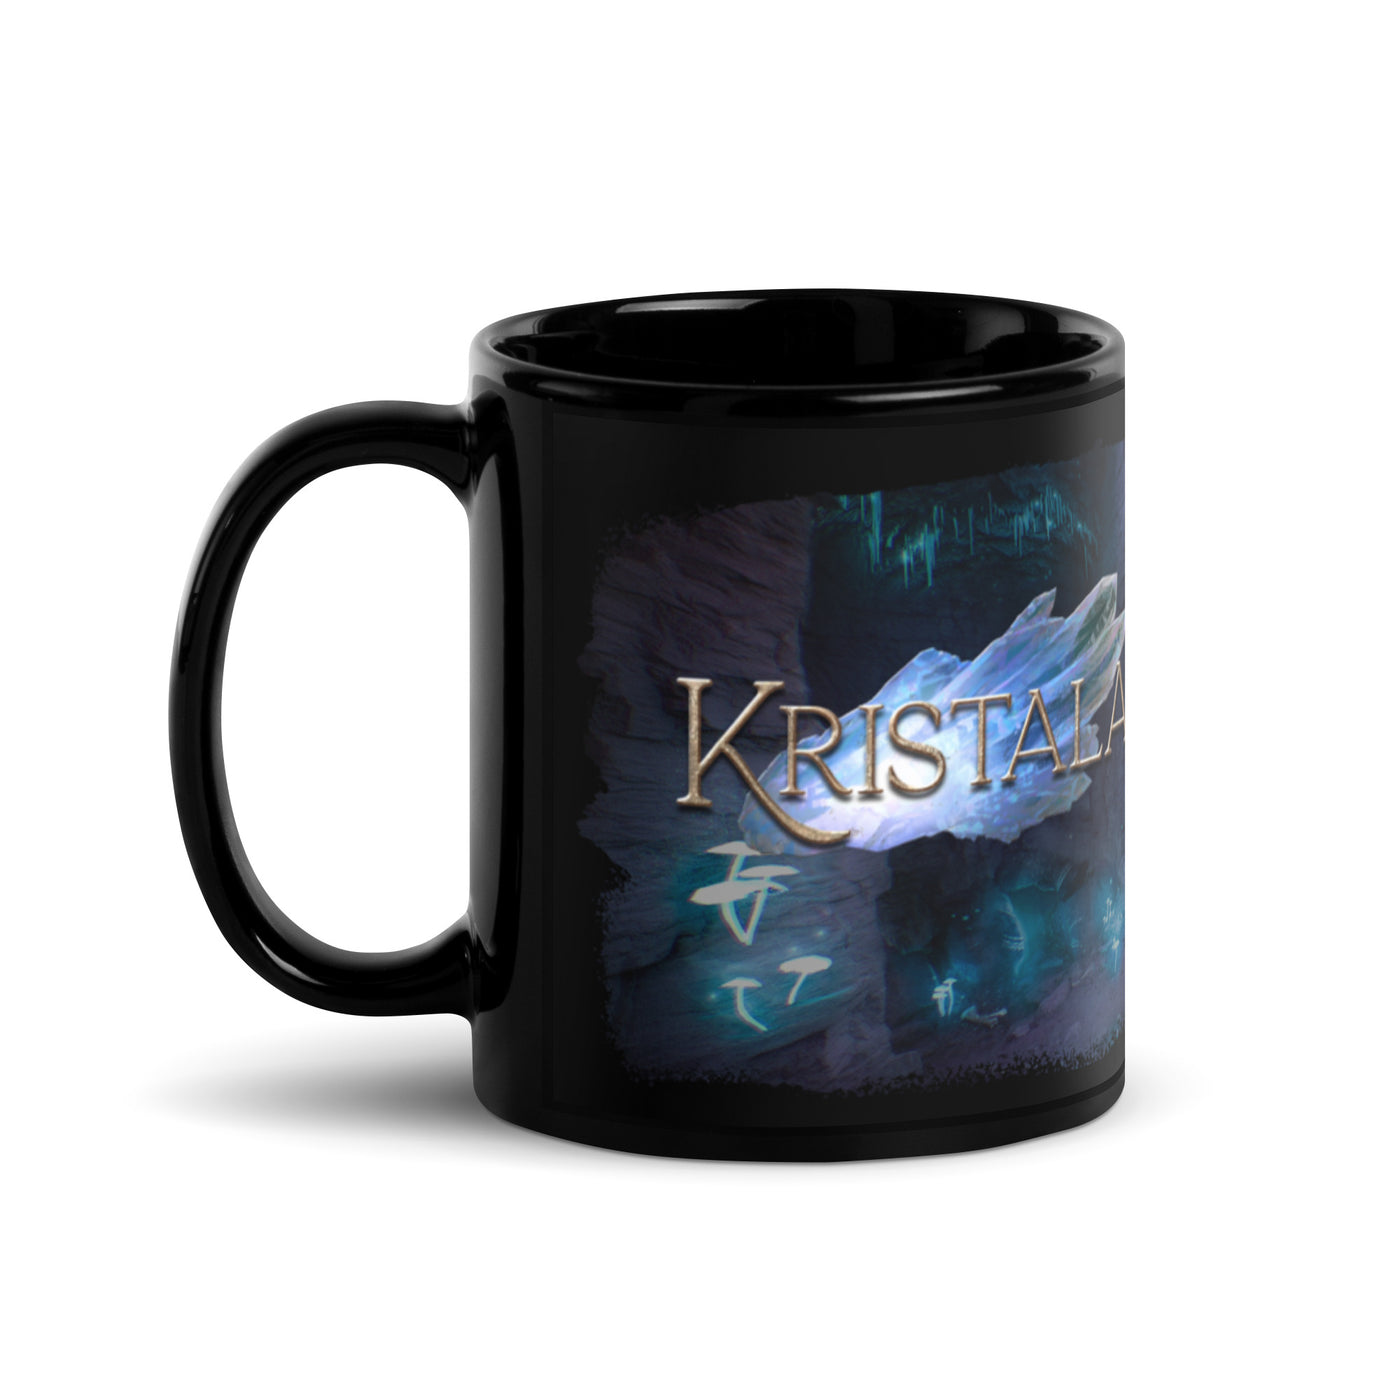 side view of black ceramic coffe mug tea or tea mug with glossy finish and handle facing left with kristala game dark fantasy action rpg logo atop a cave crystal game illustration white background